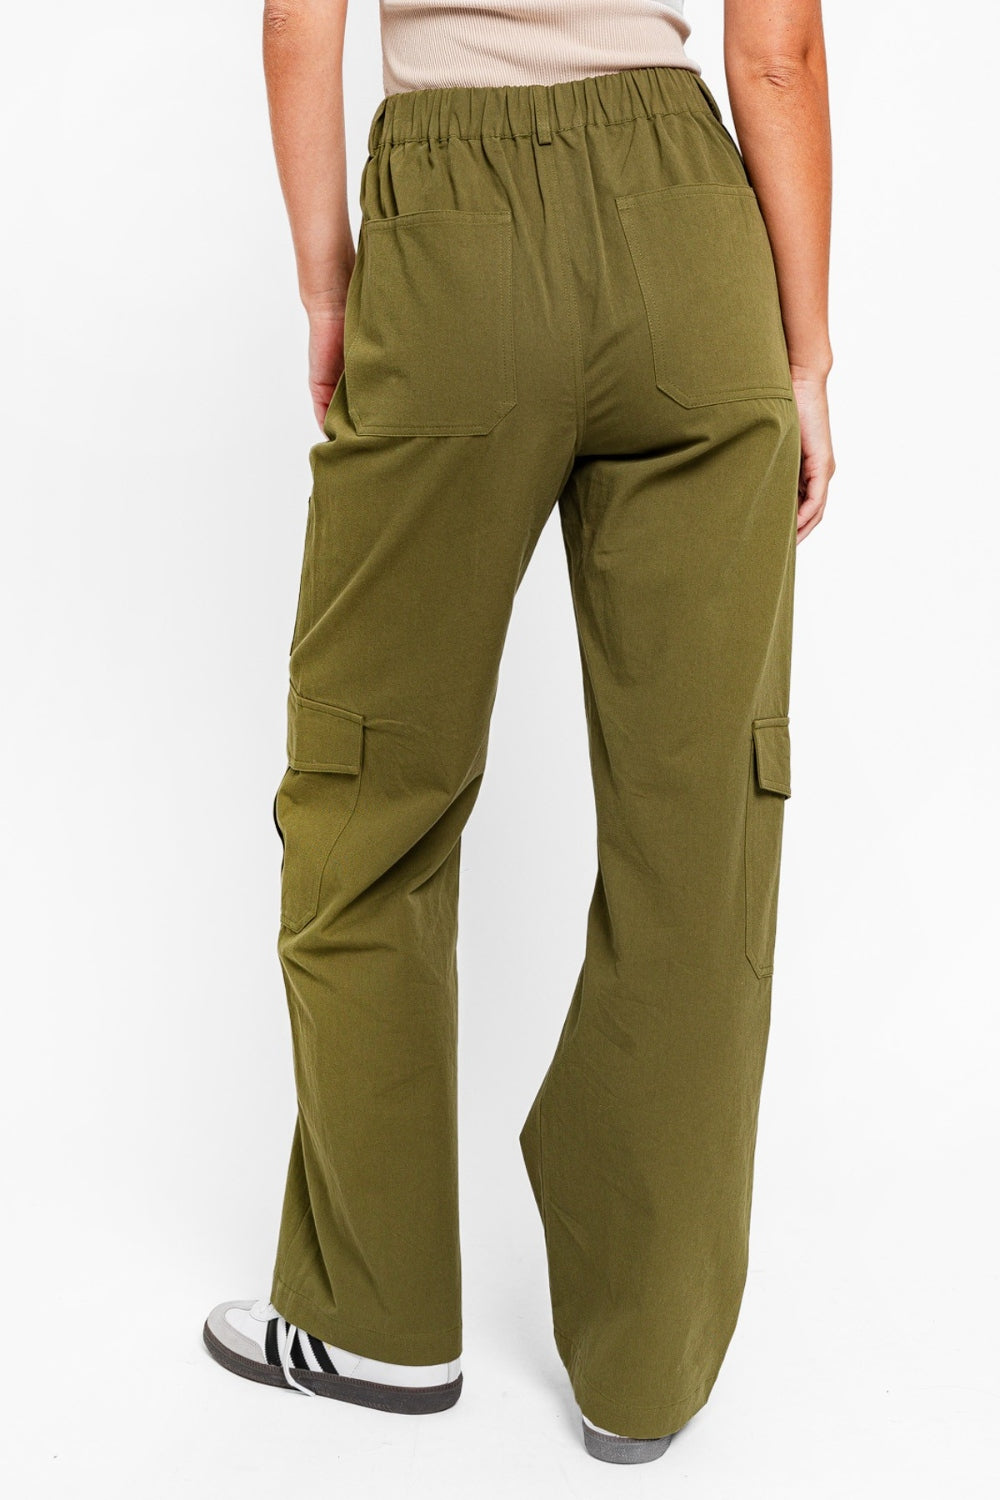 Tasha Apparel High Waisted Wide Leg Cargo Pants with Pockets [click for additional options]